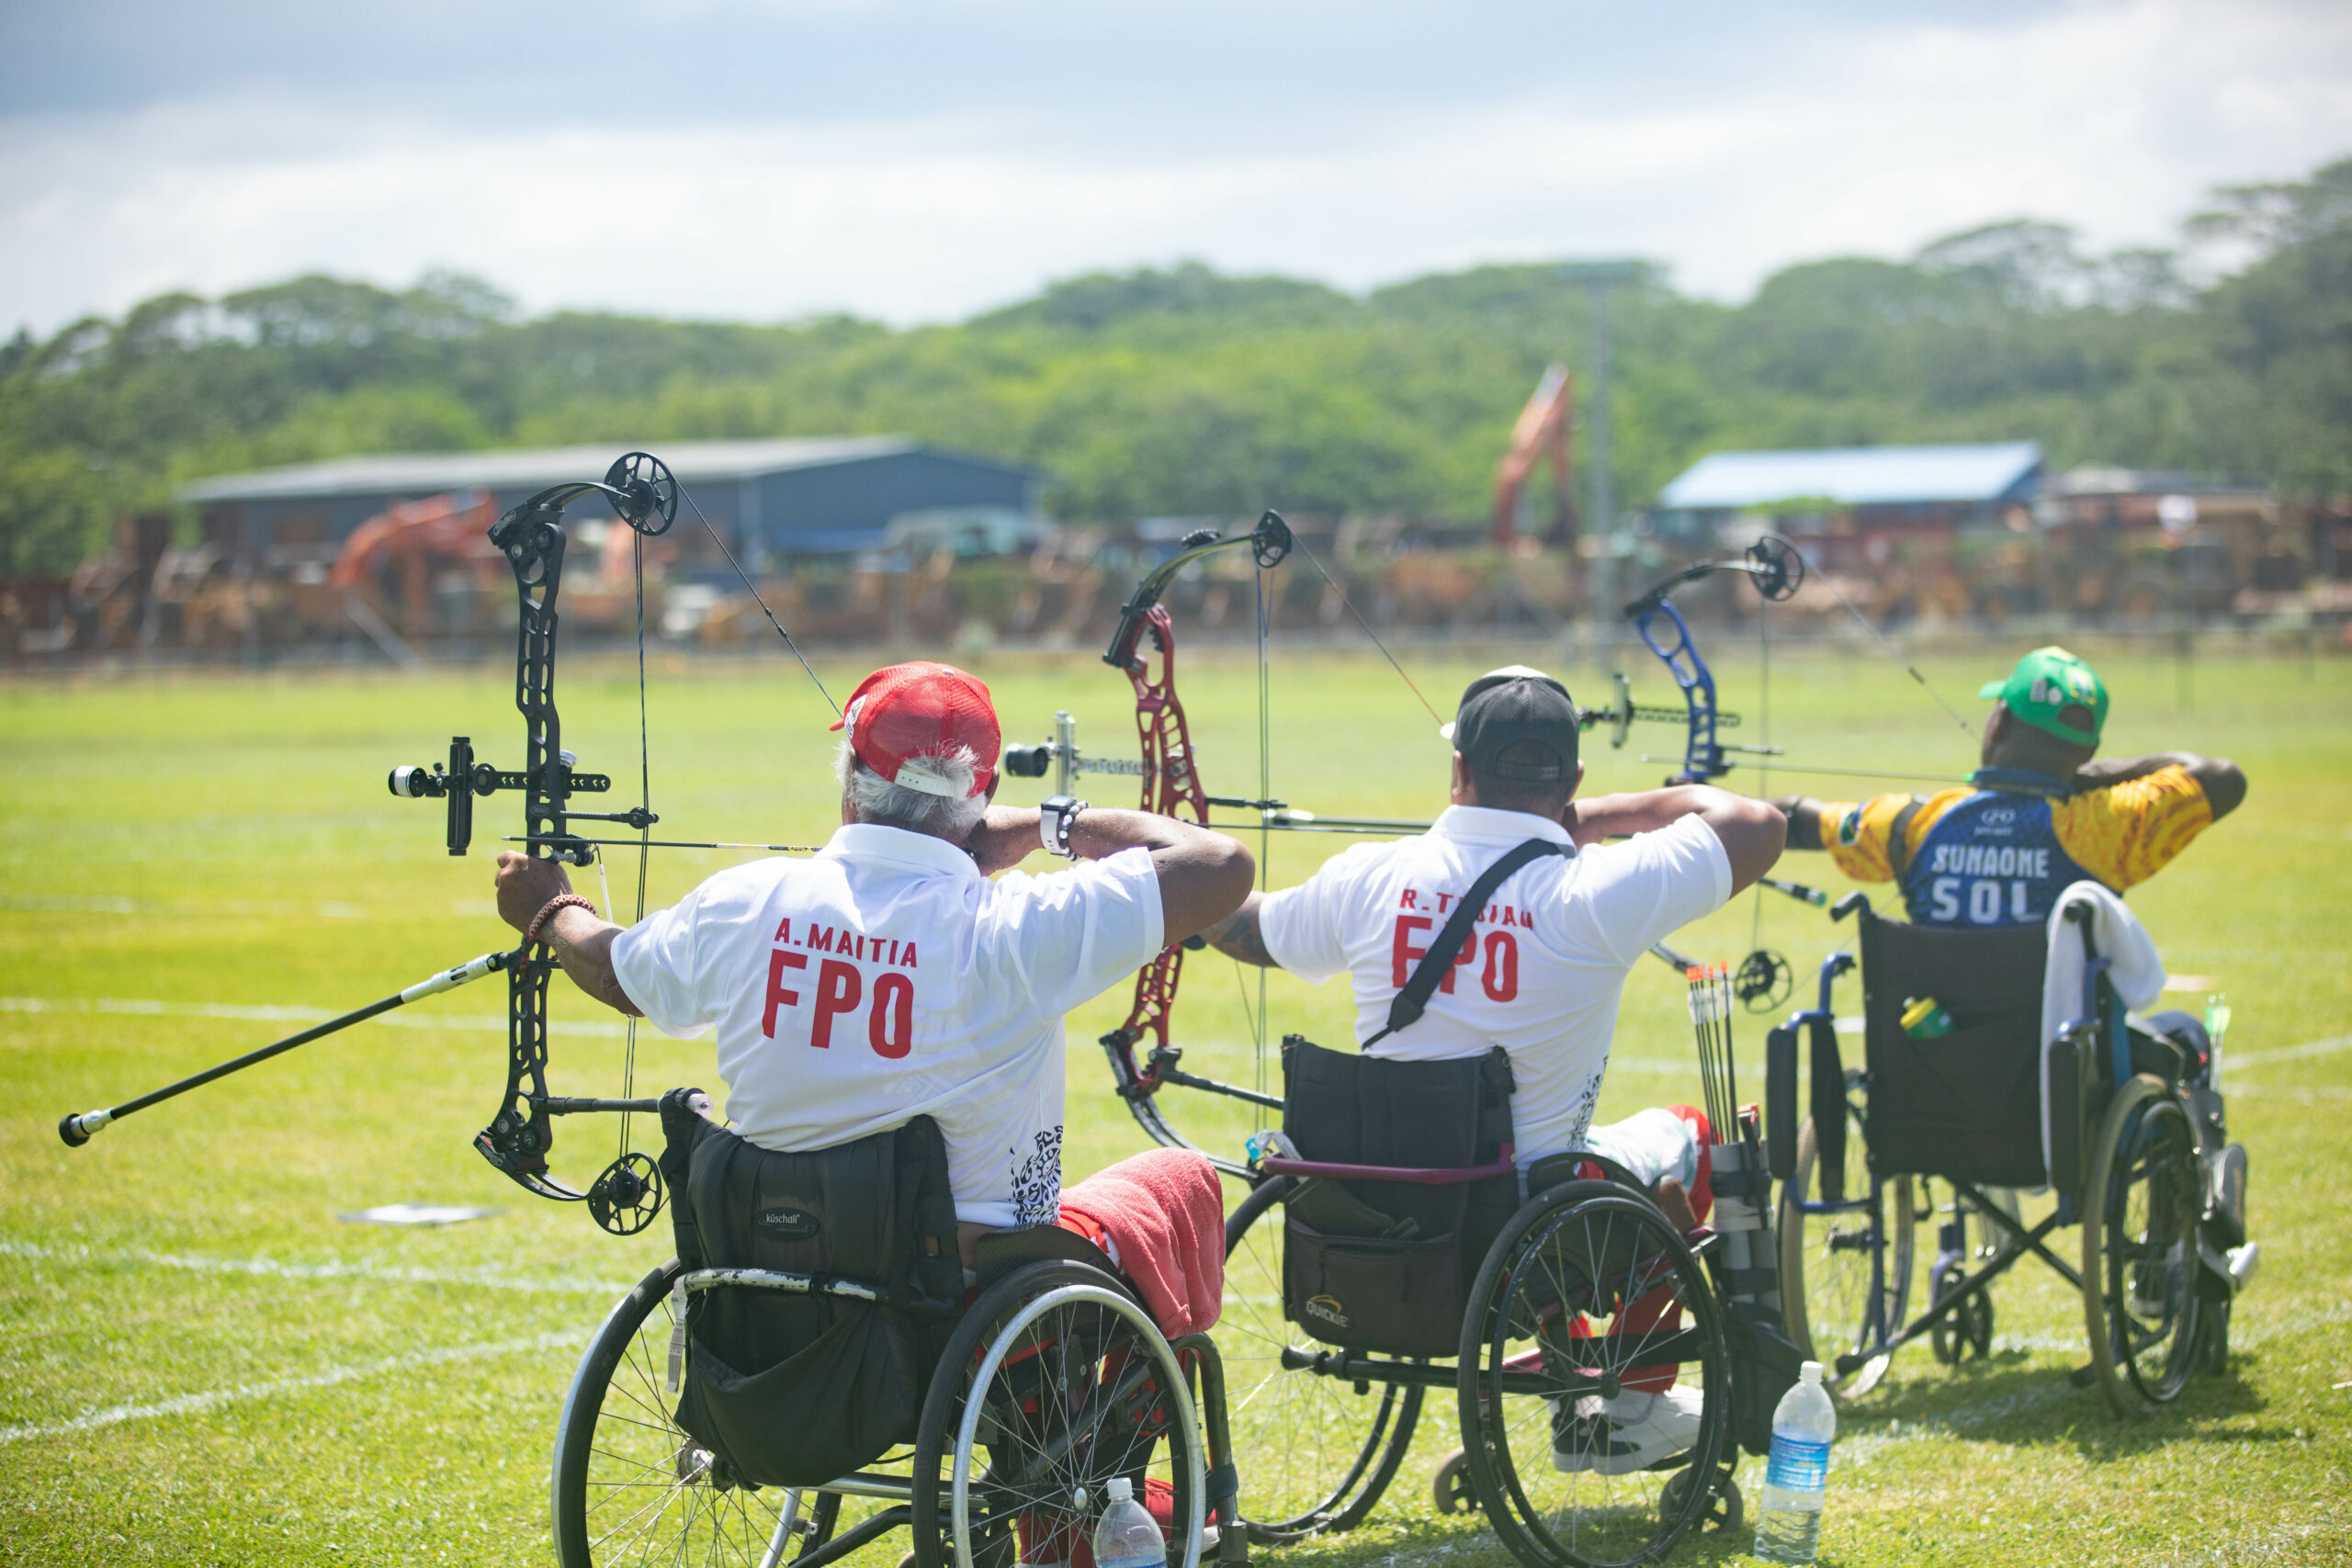 People in wheelchairs competing in archery